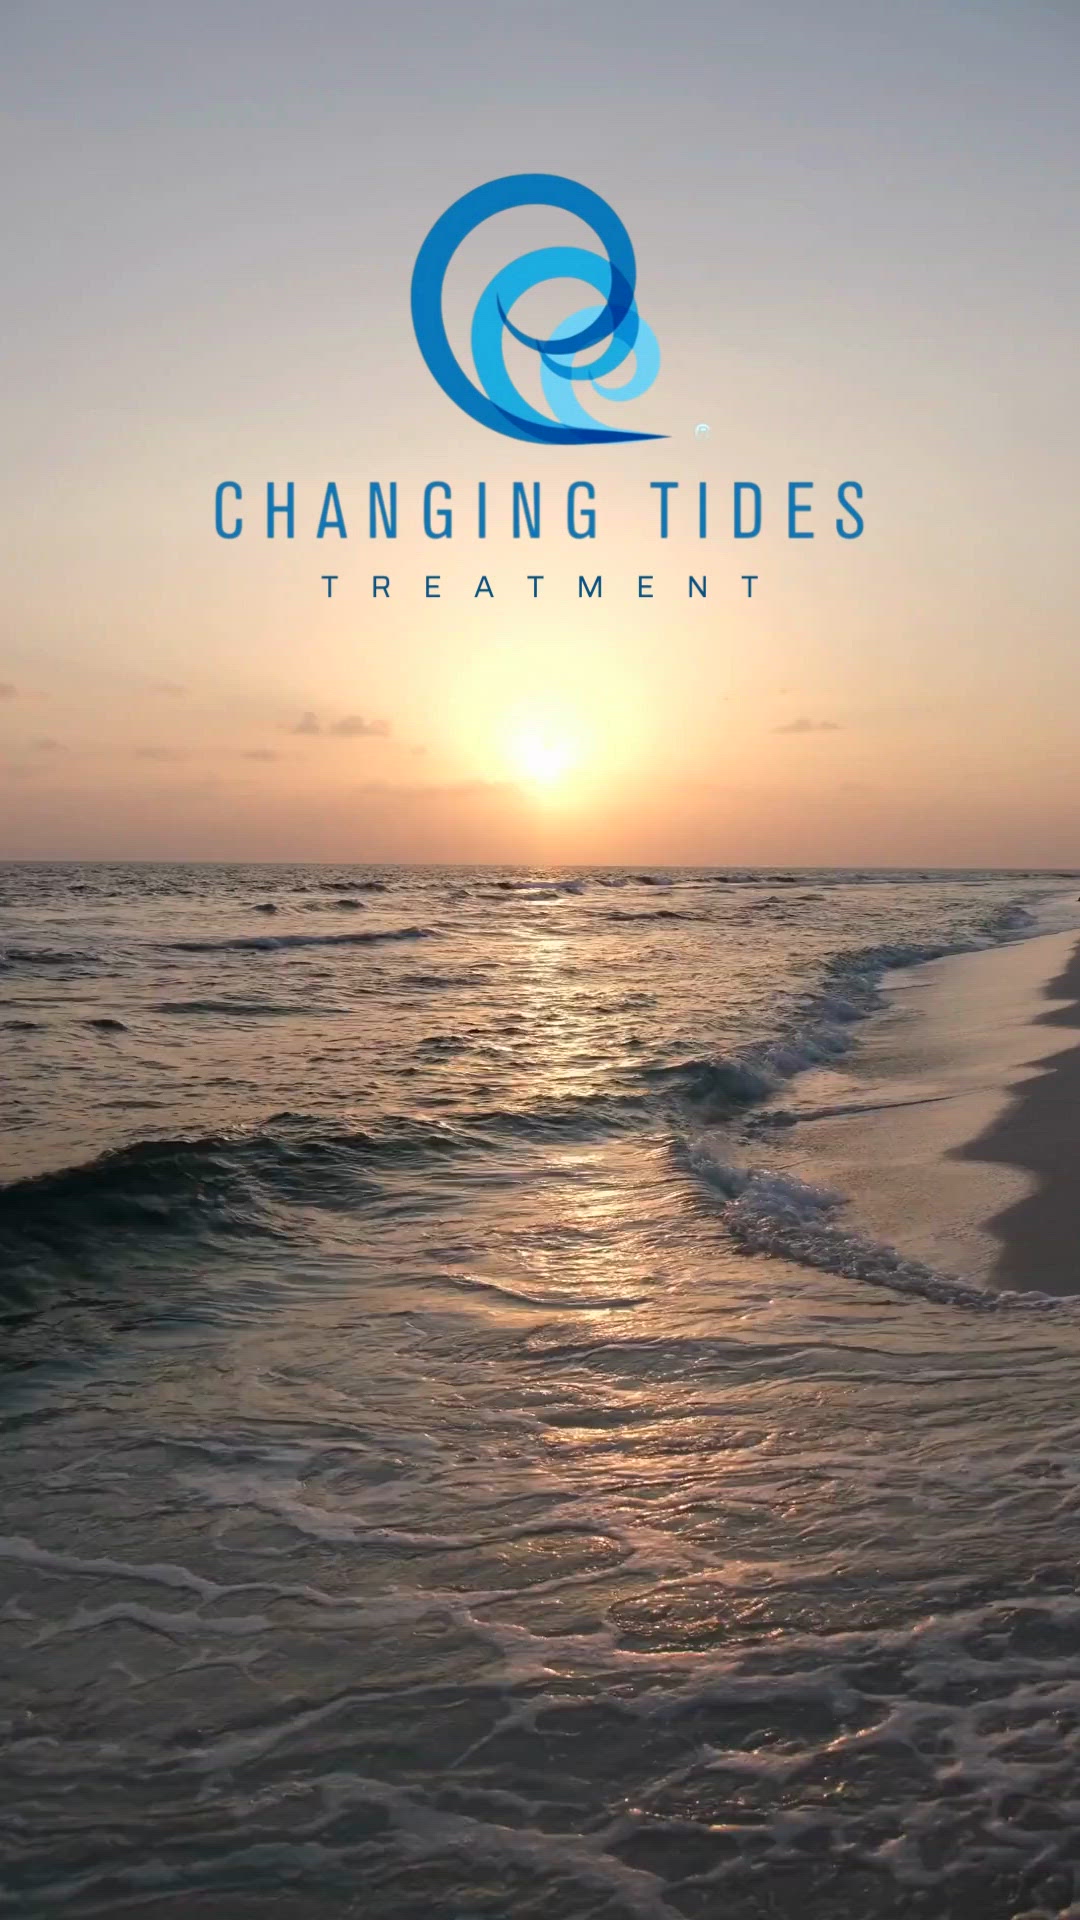 Changing Tides Treatment